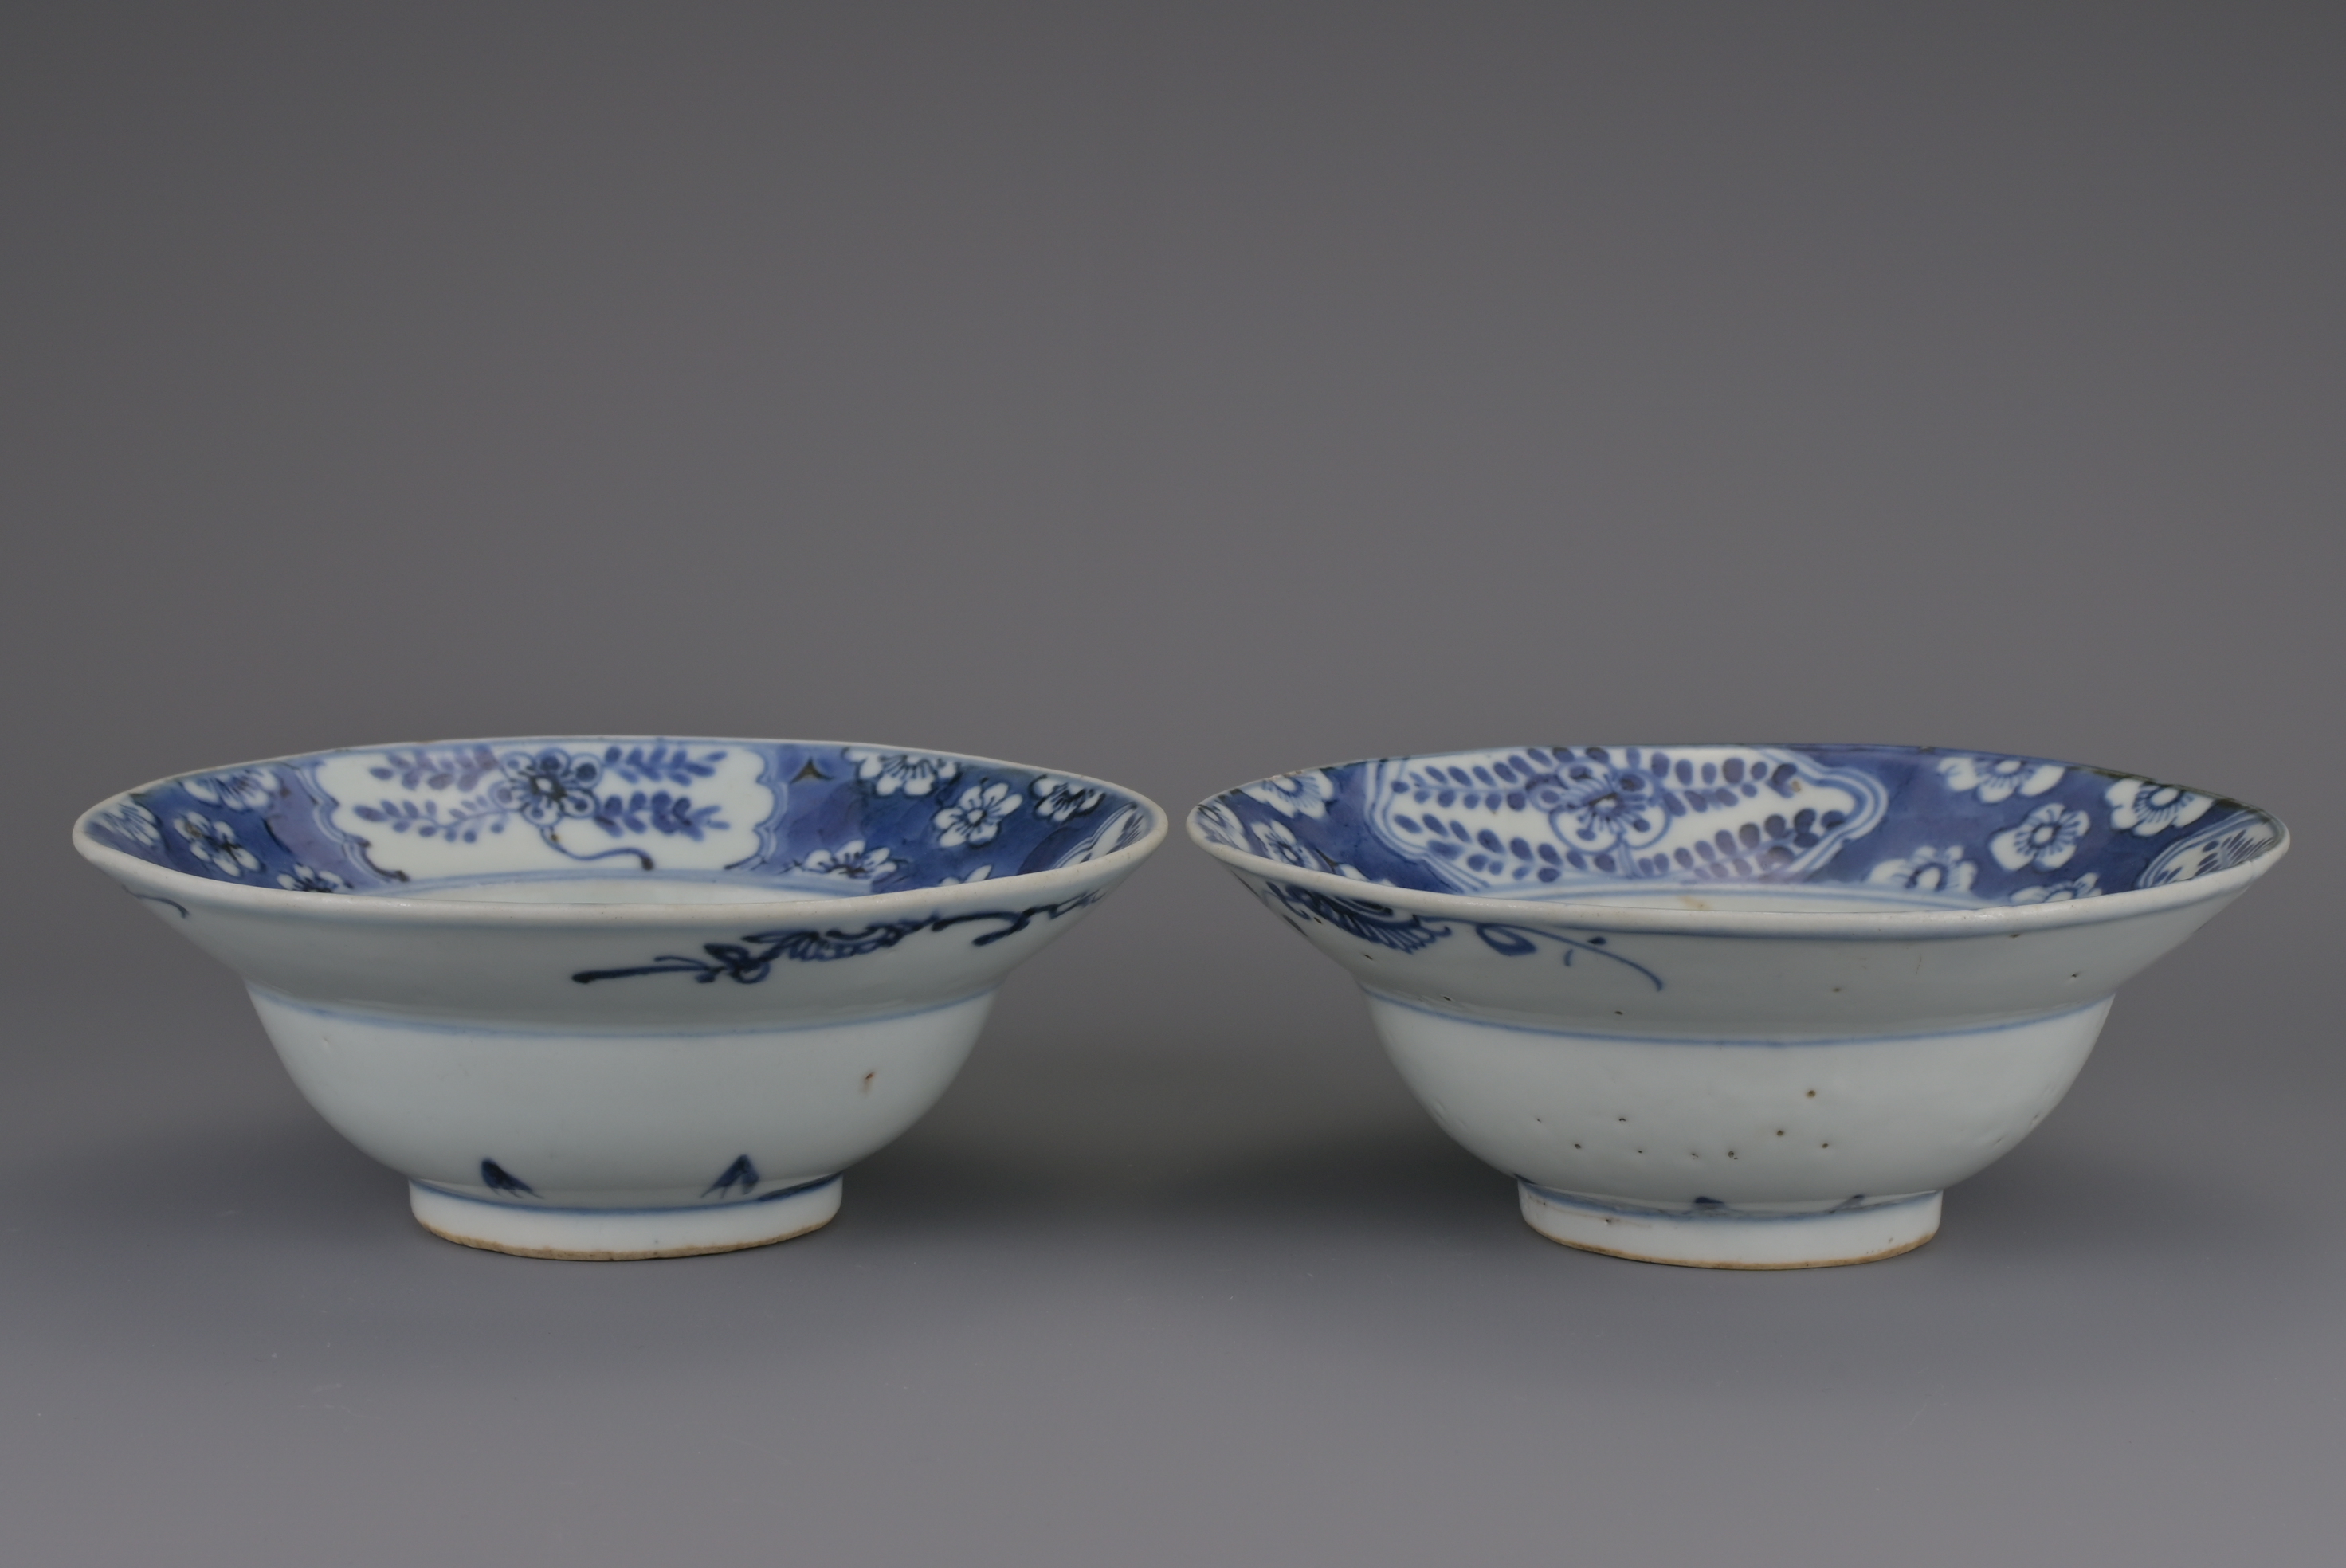 A PAIR OF CHINESE BLUE AND WHITE PORCELAIN KLAPMUTS BOWLS, LATE MING/EARLY QING DYNASTY, 17TH CENTUR - Image 3 of 8